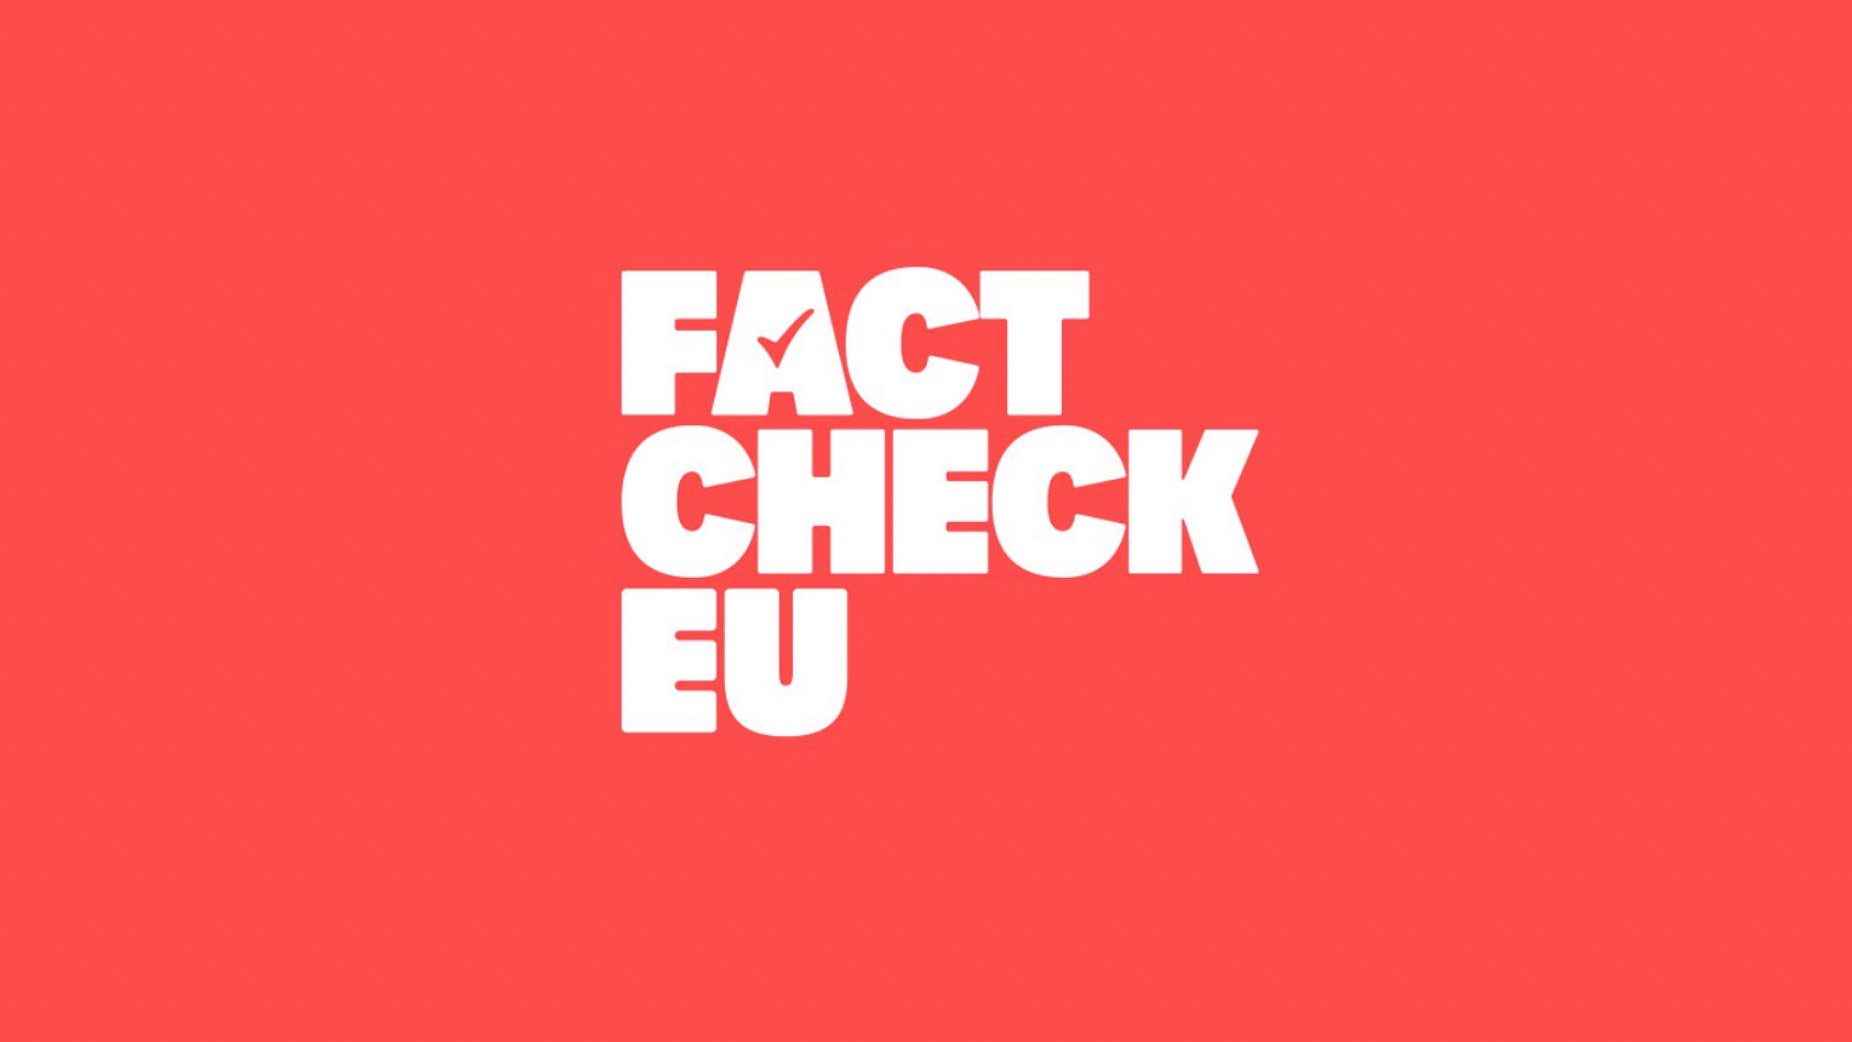 EU fact-checking project launches ahead of 2019 parliamentary elections